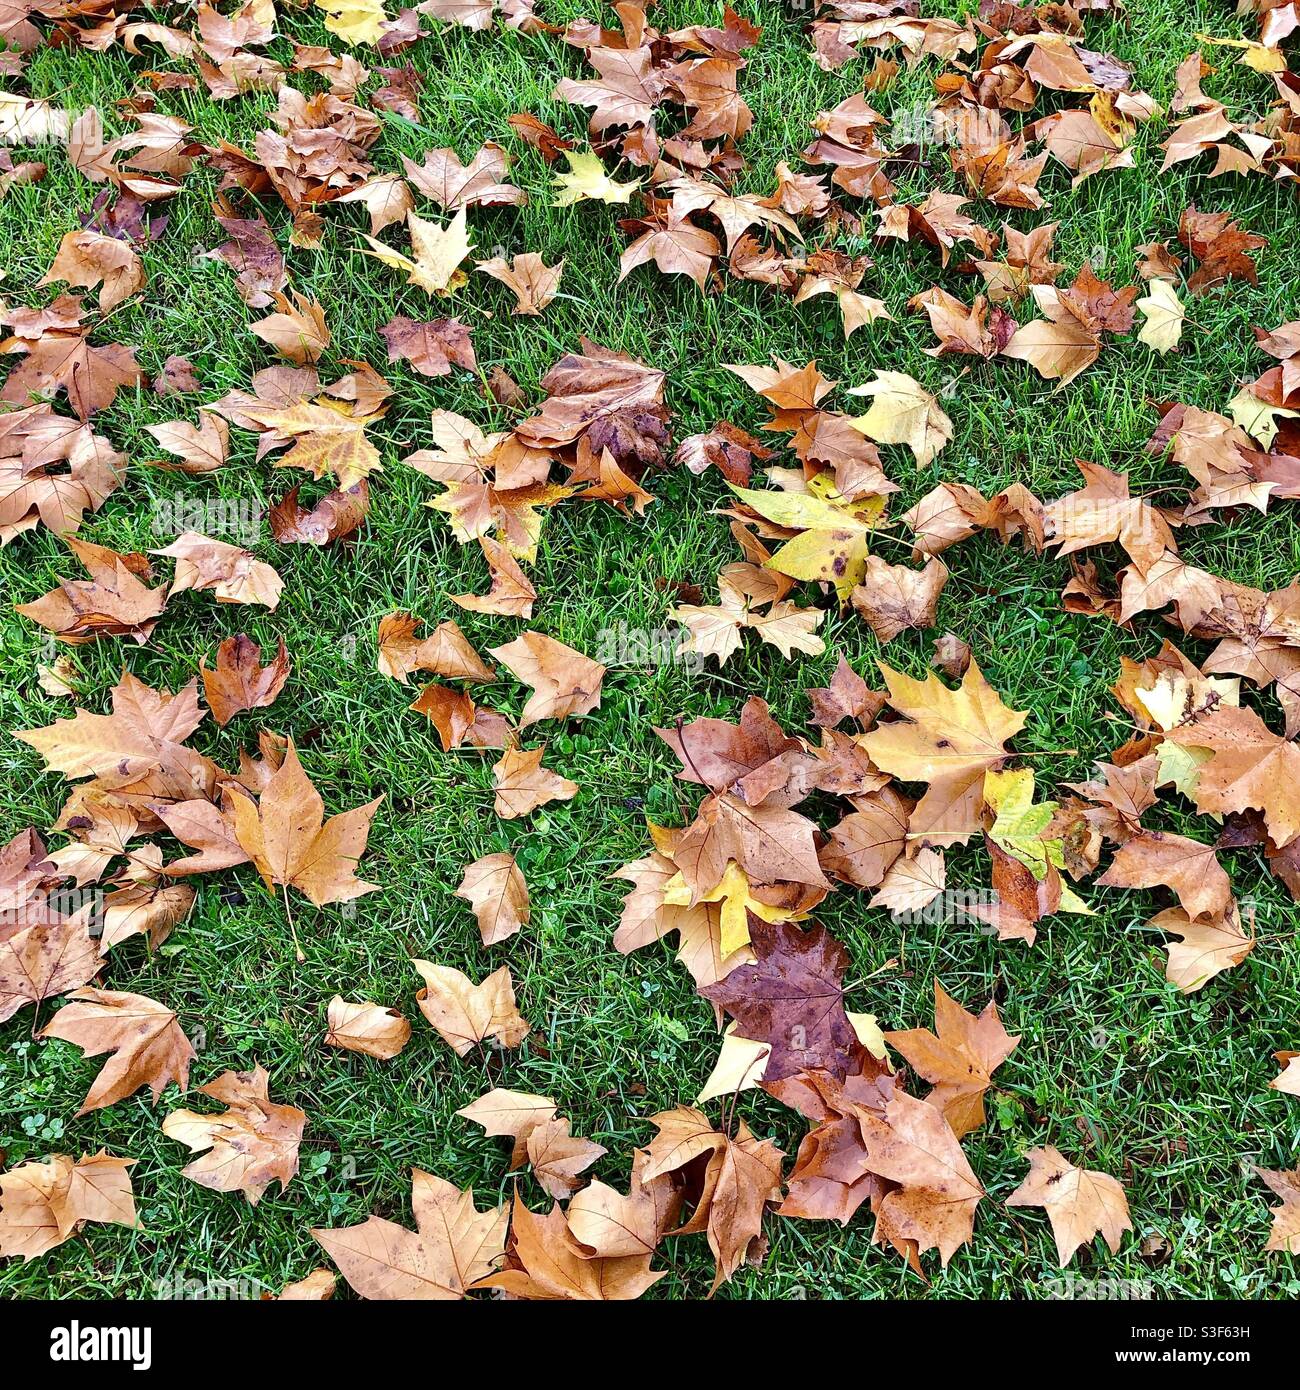 Autumn leaves from Plane tree on grass. Stock Photo